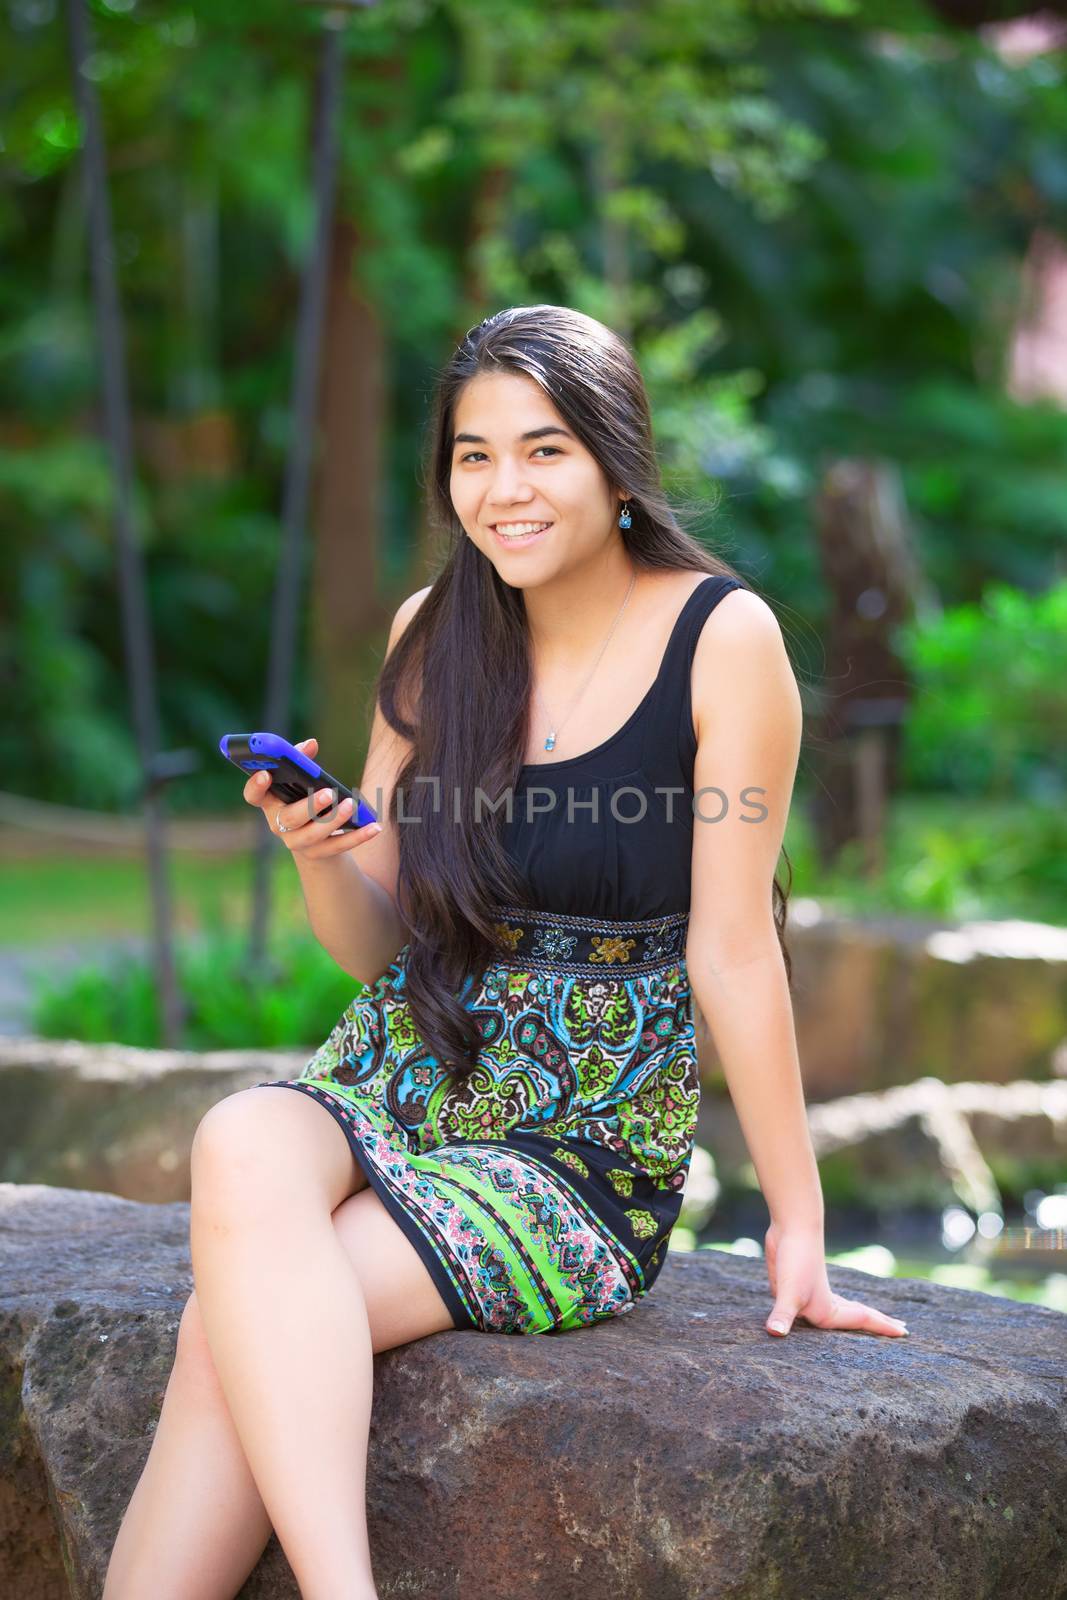 Biracial teen girl sitting on rock looking at cellphone by jarenwicklund